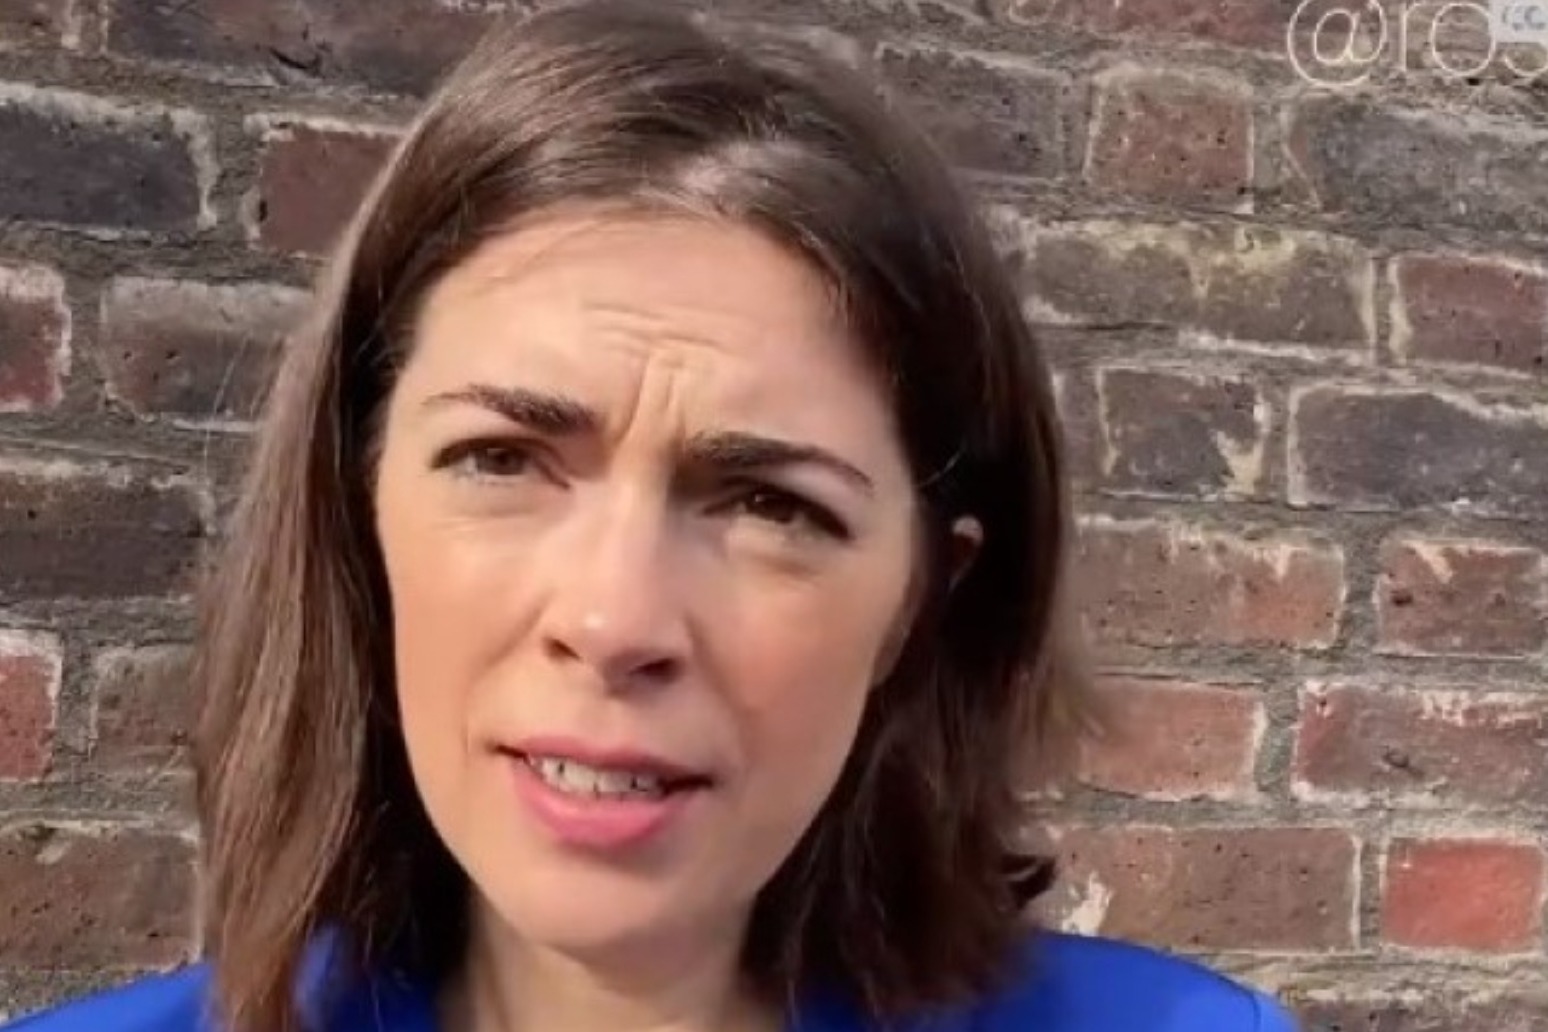 Politicians of 2022 have been ‘ripe for parody’, says viral comedian Rosie Holt 